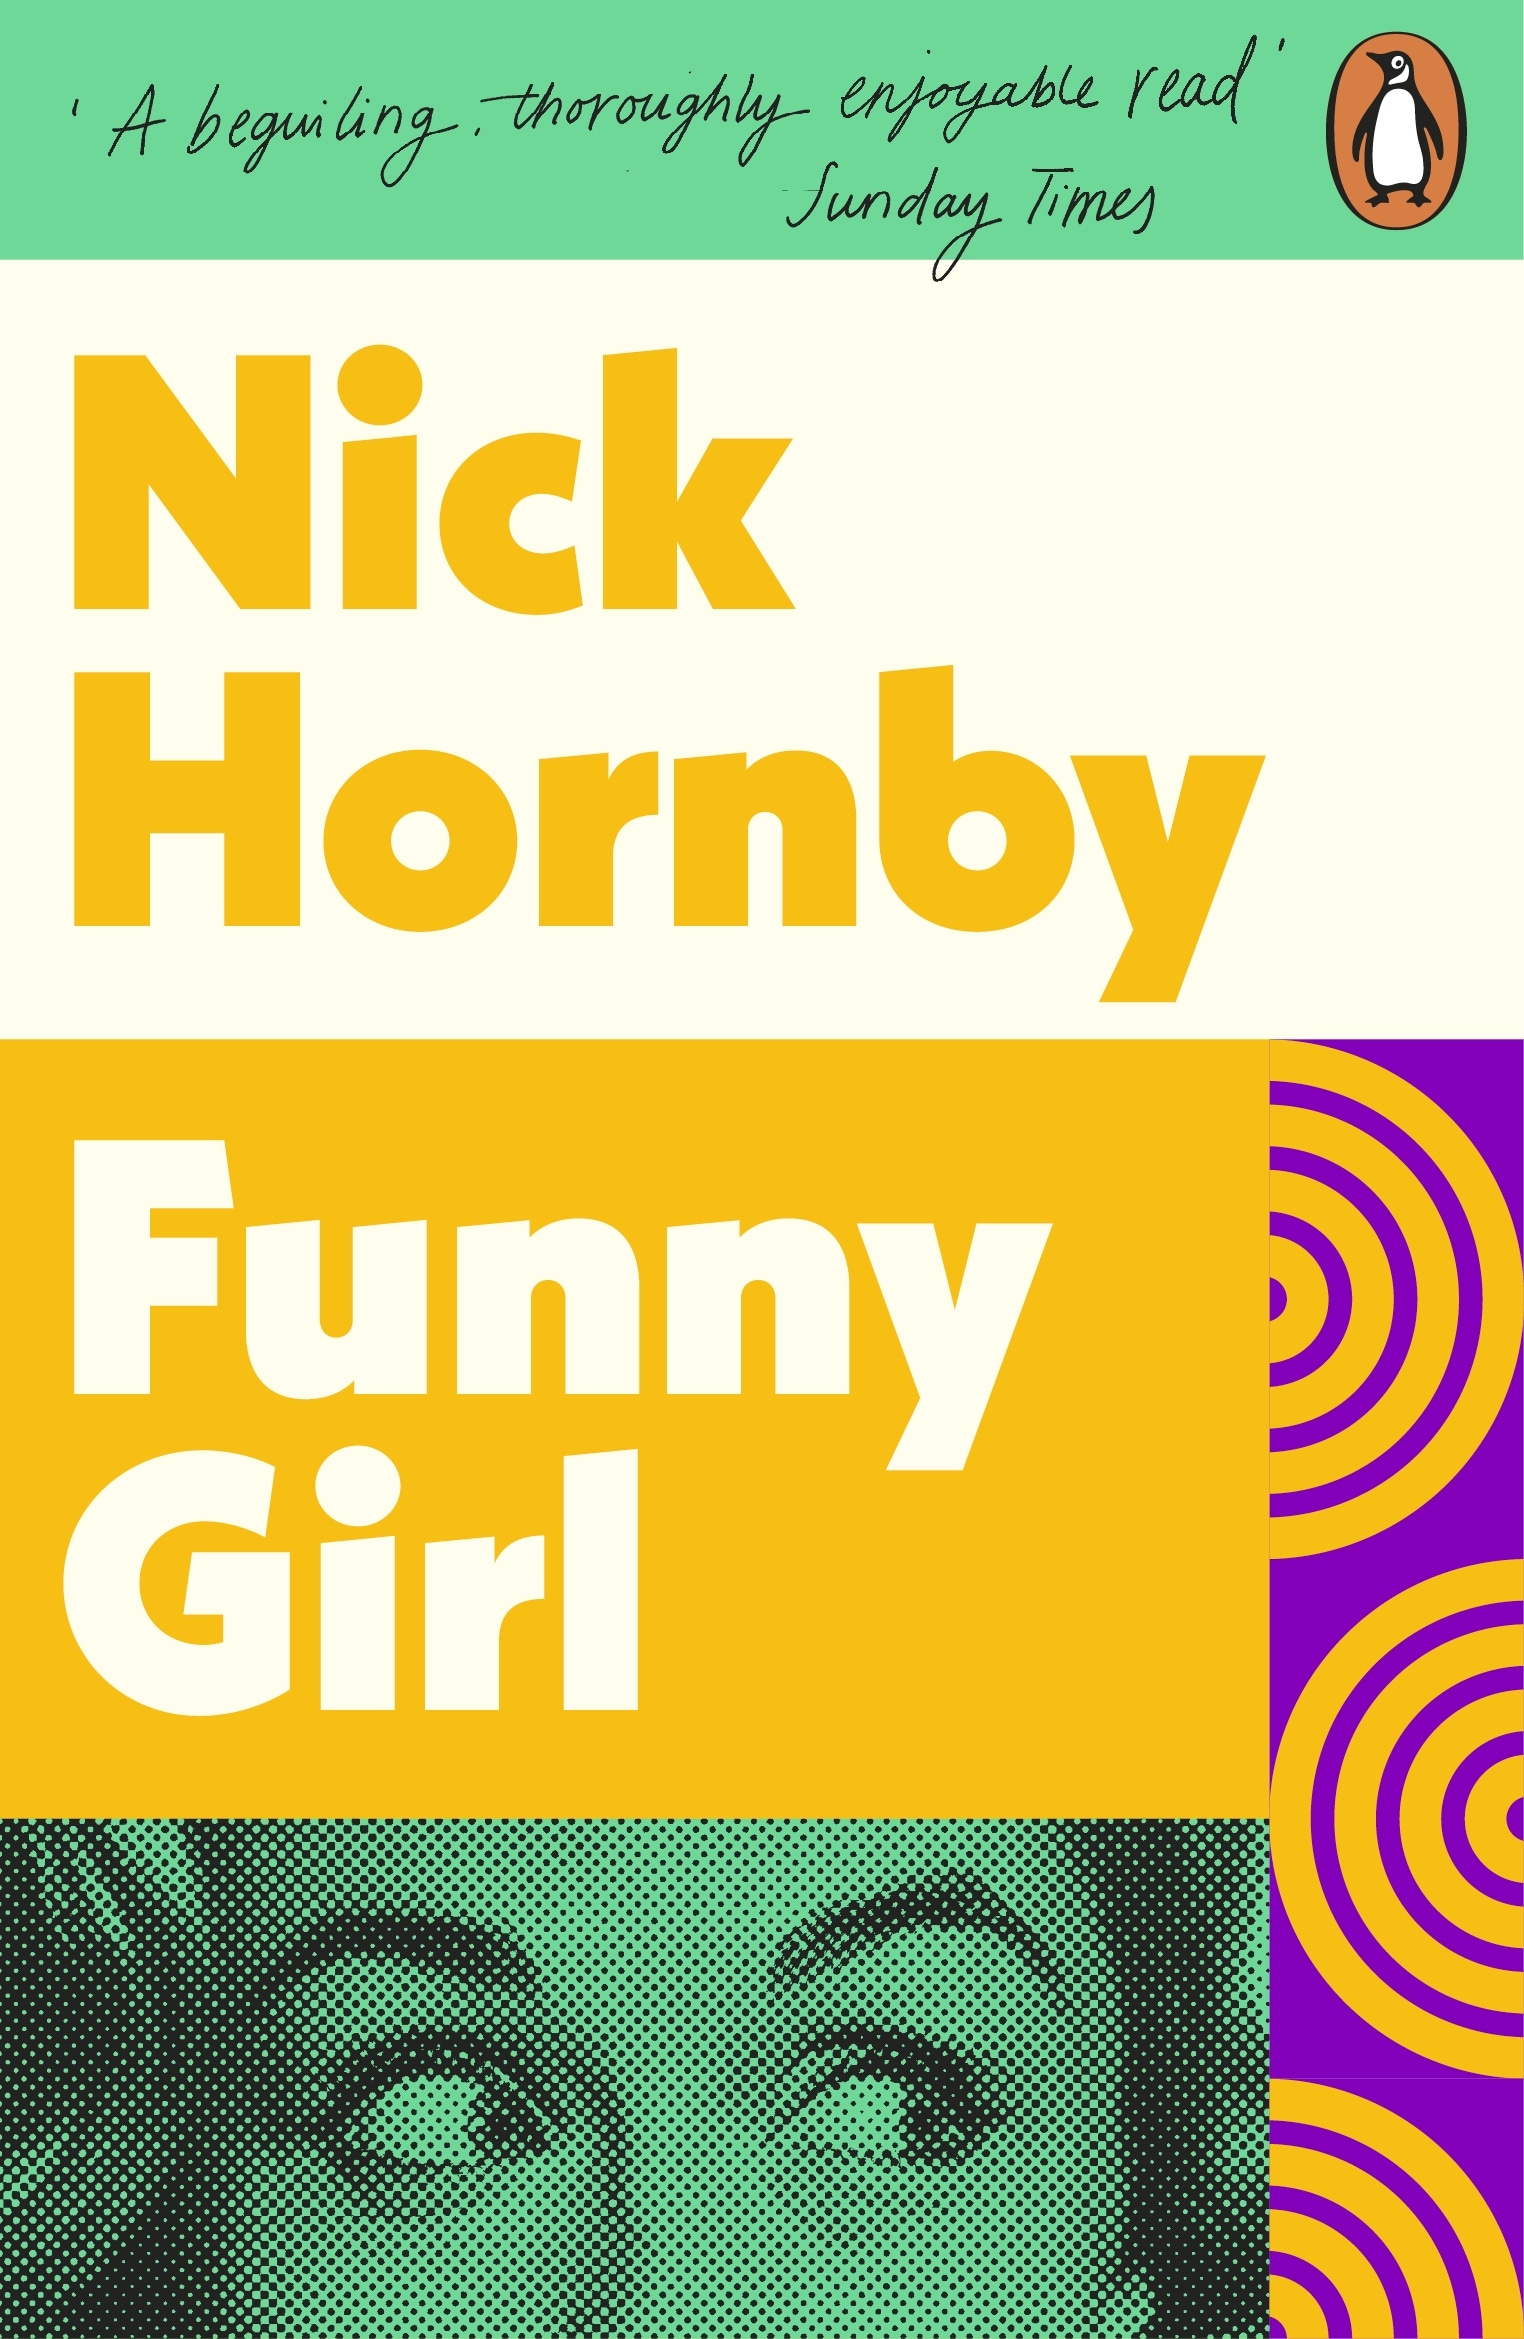 Book “Funny Girl” by Nick Hornby — May 7, 2015